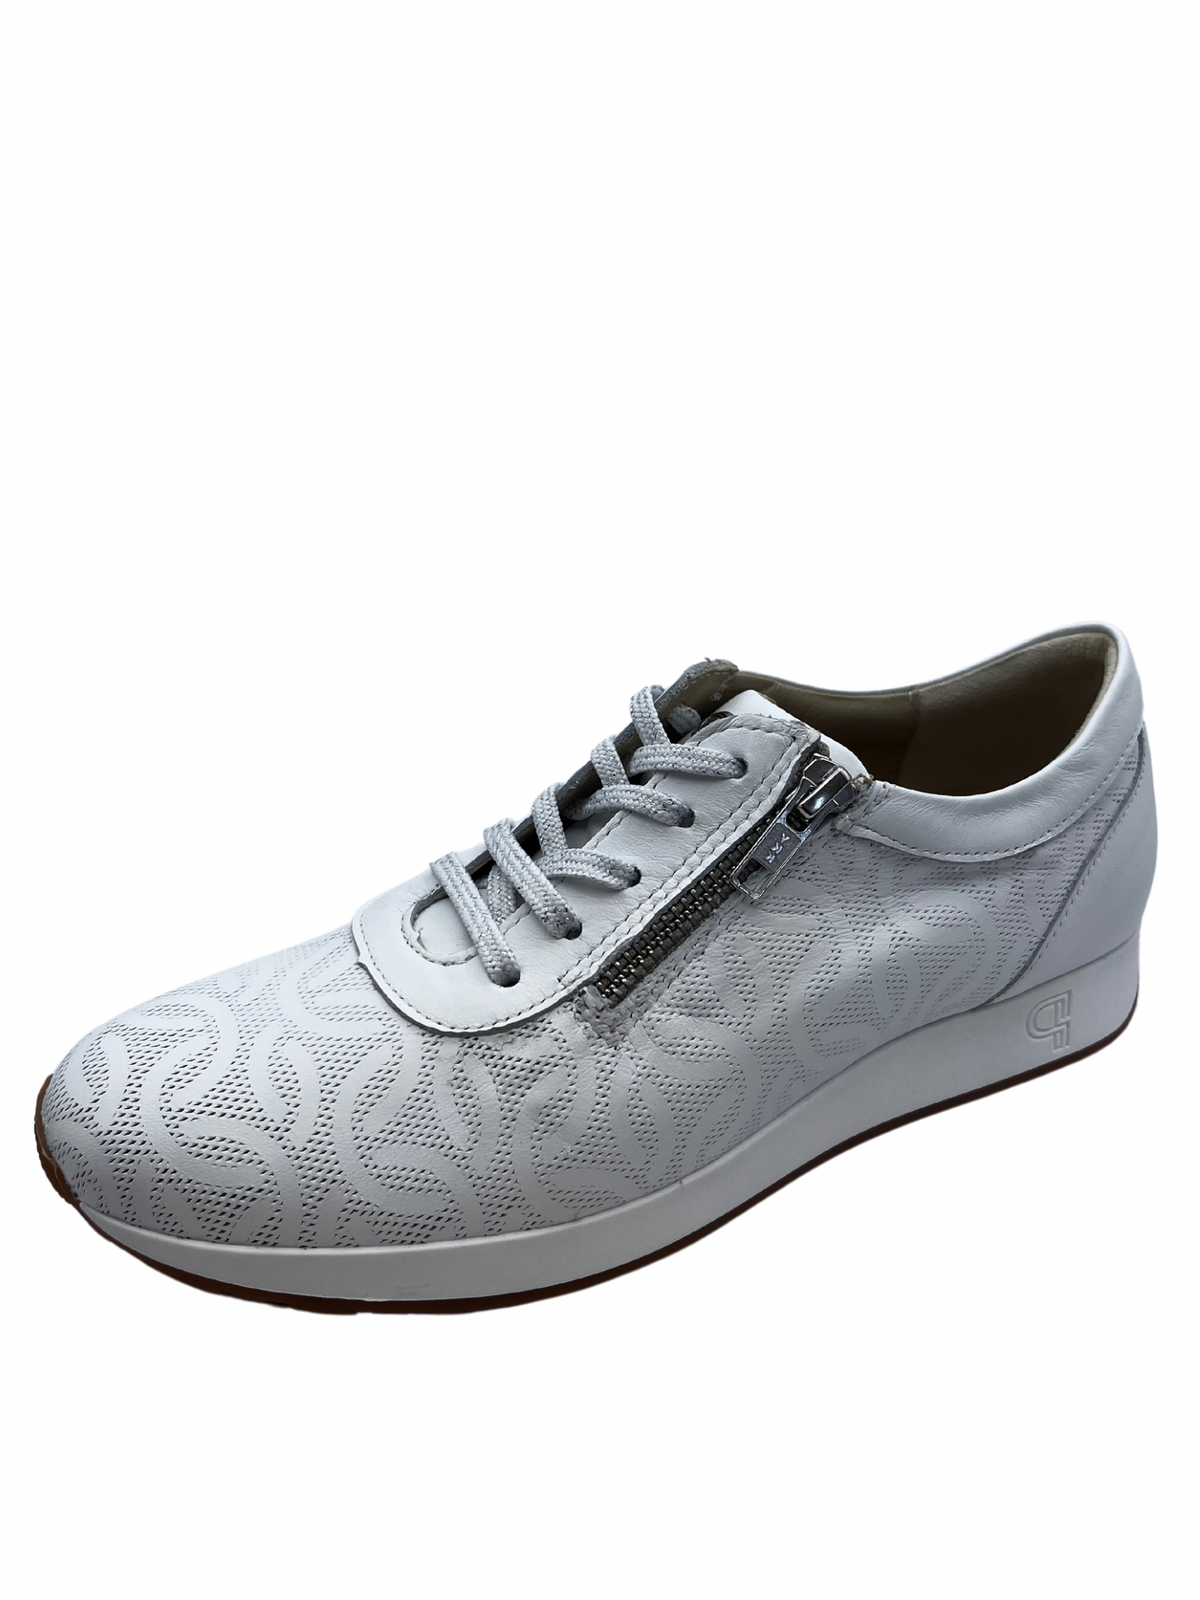 Pitillos White Leather Trainer With Perforated Details